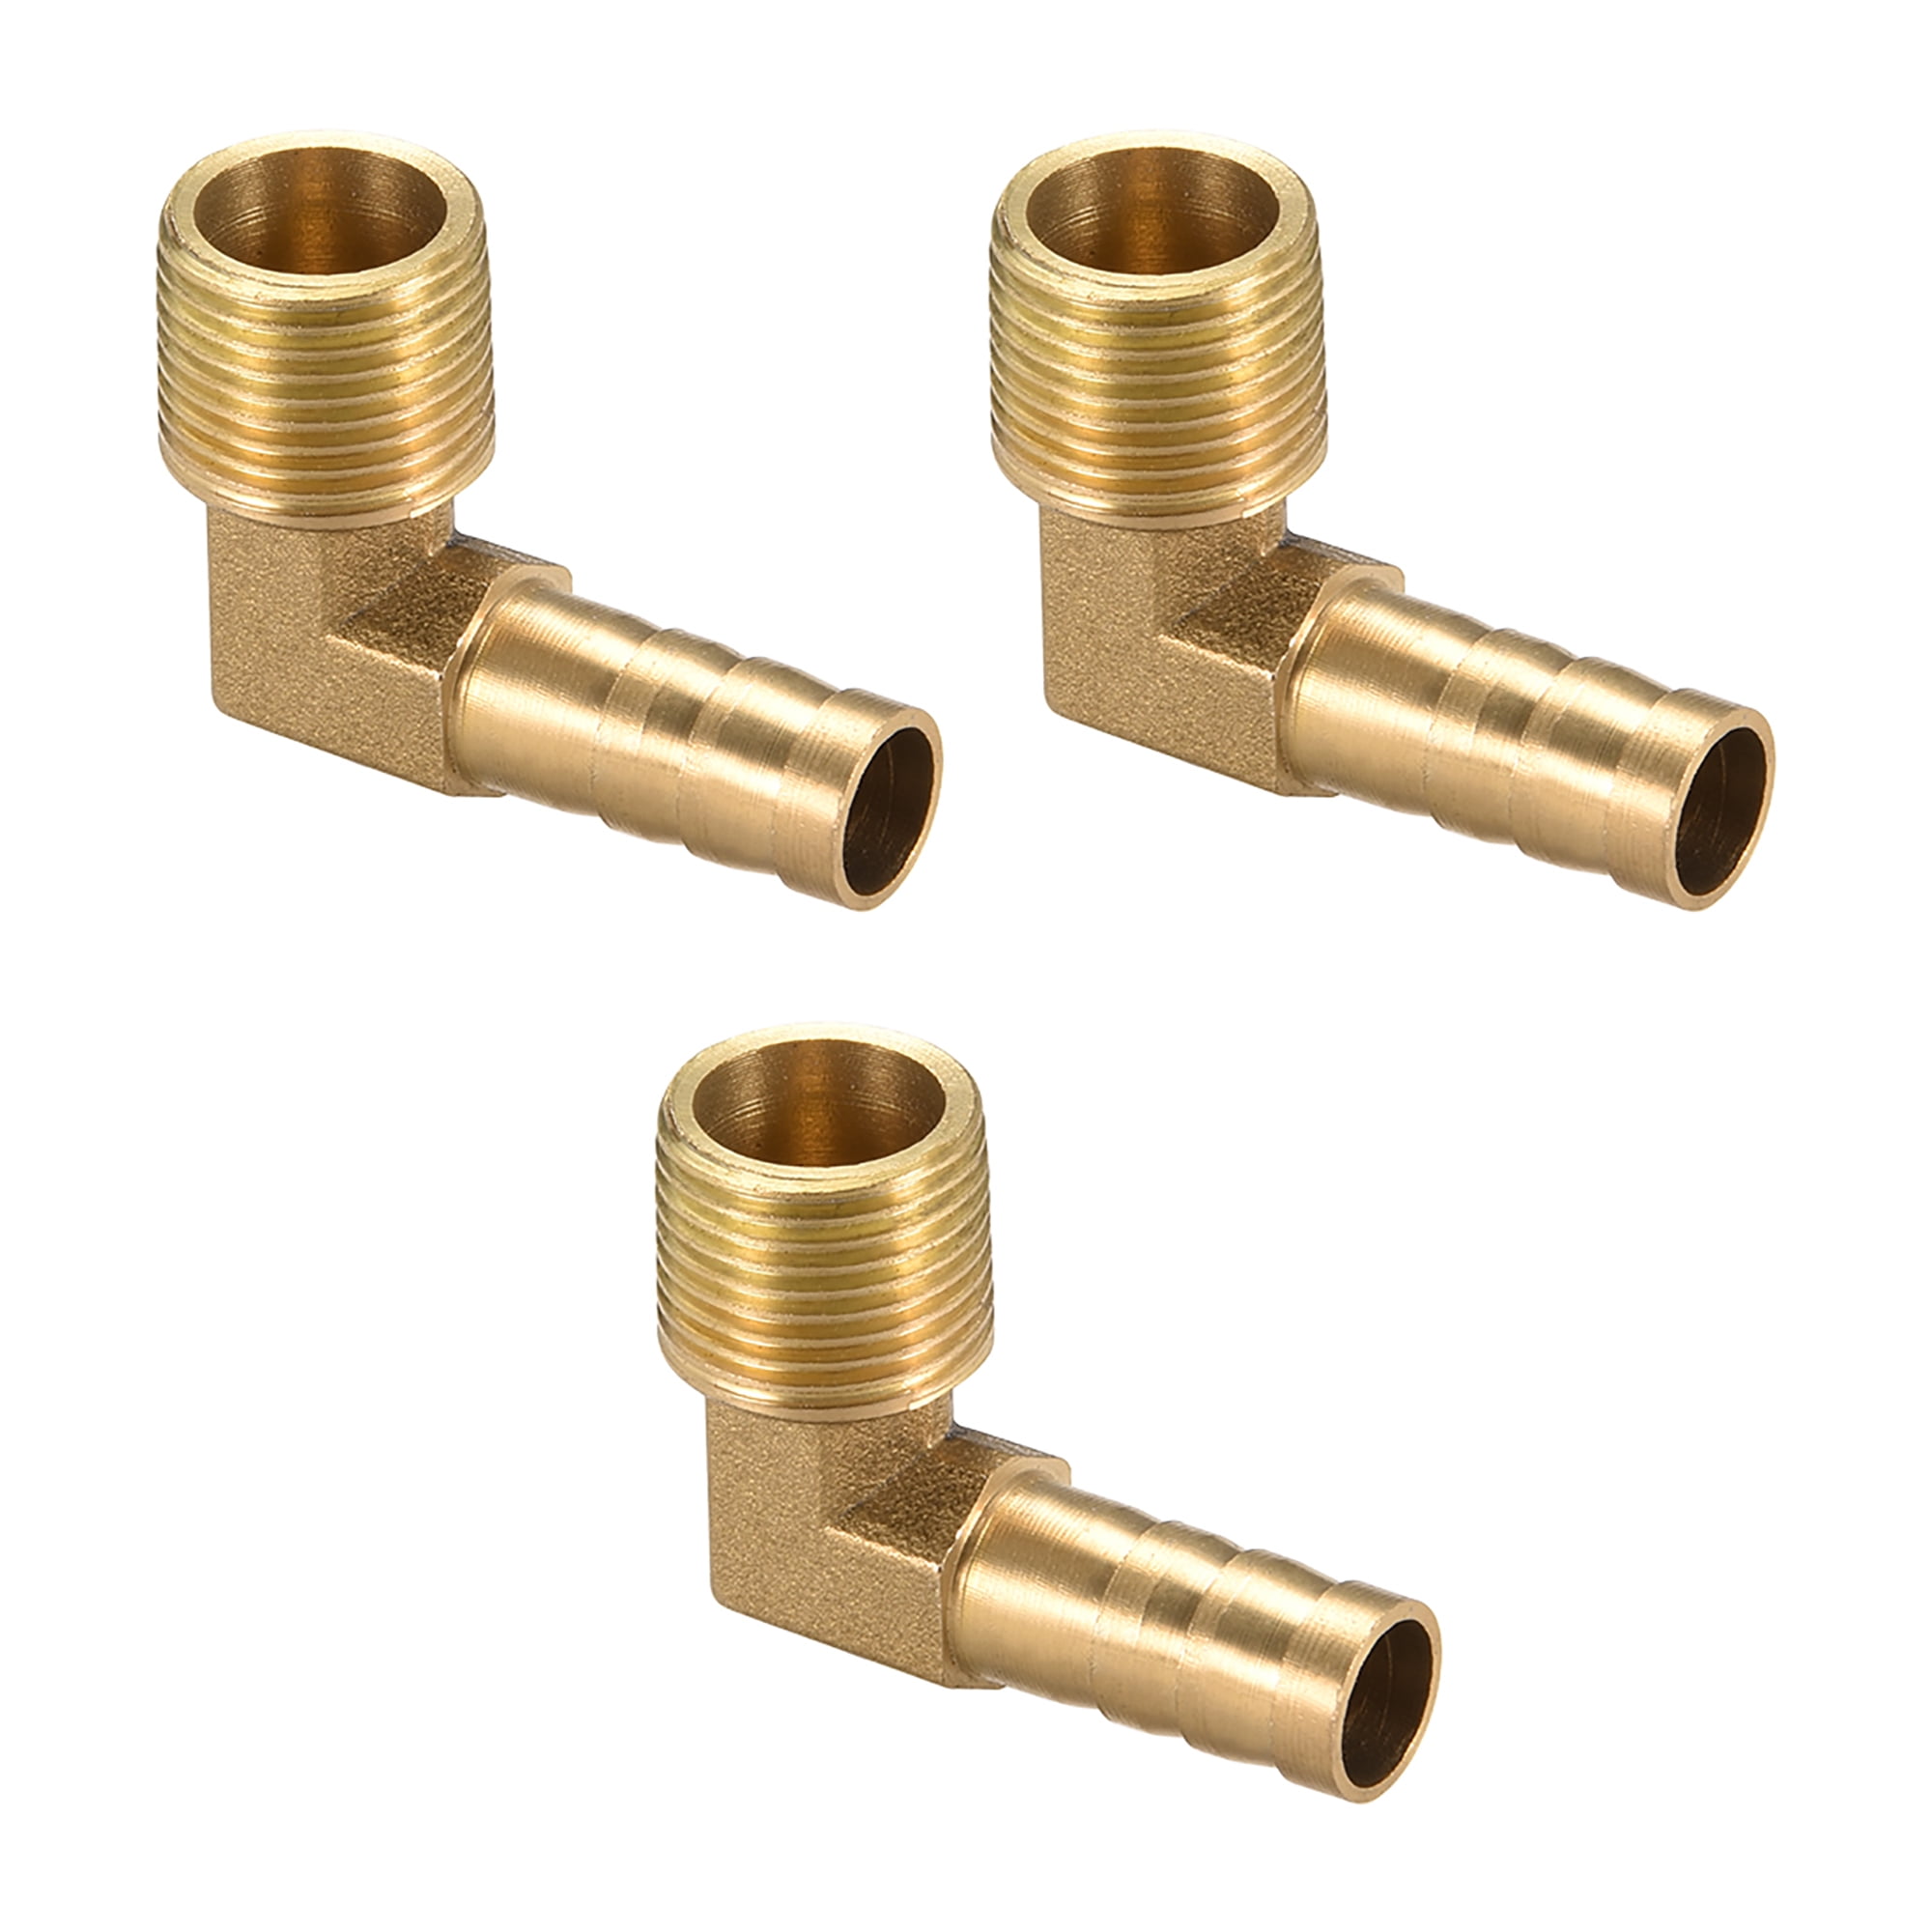 Brass Hose Fitting90 Degree Elbow,3/8" Barb x 3/8" NPT Male Pipe air Pack of 2 